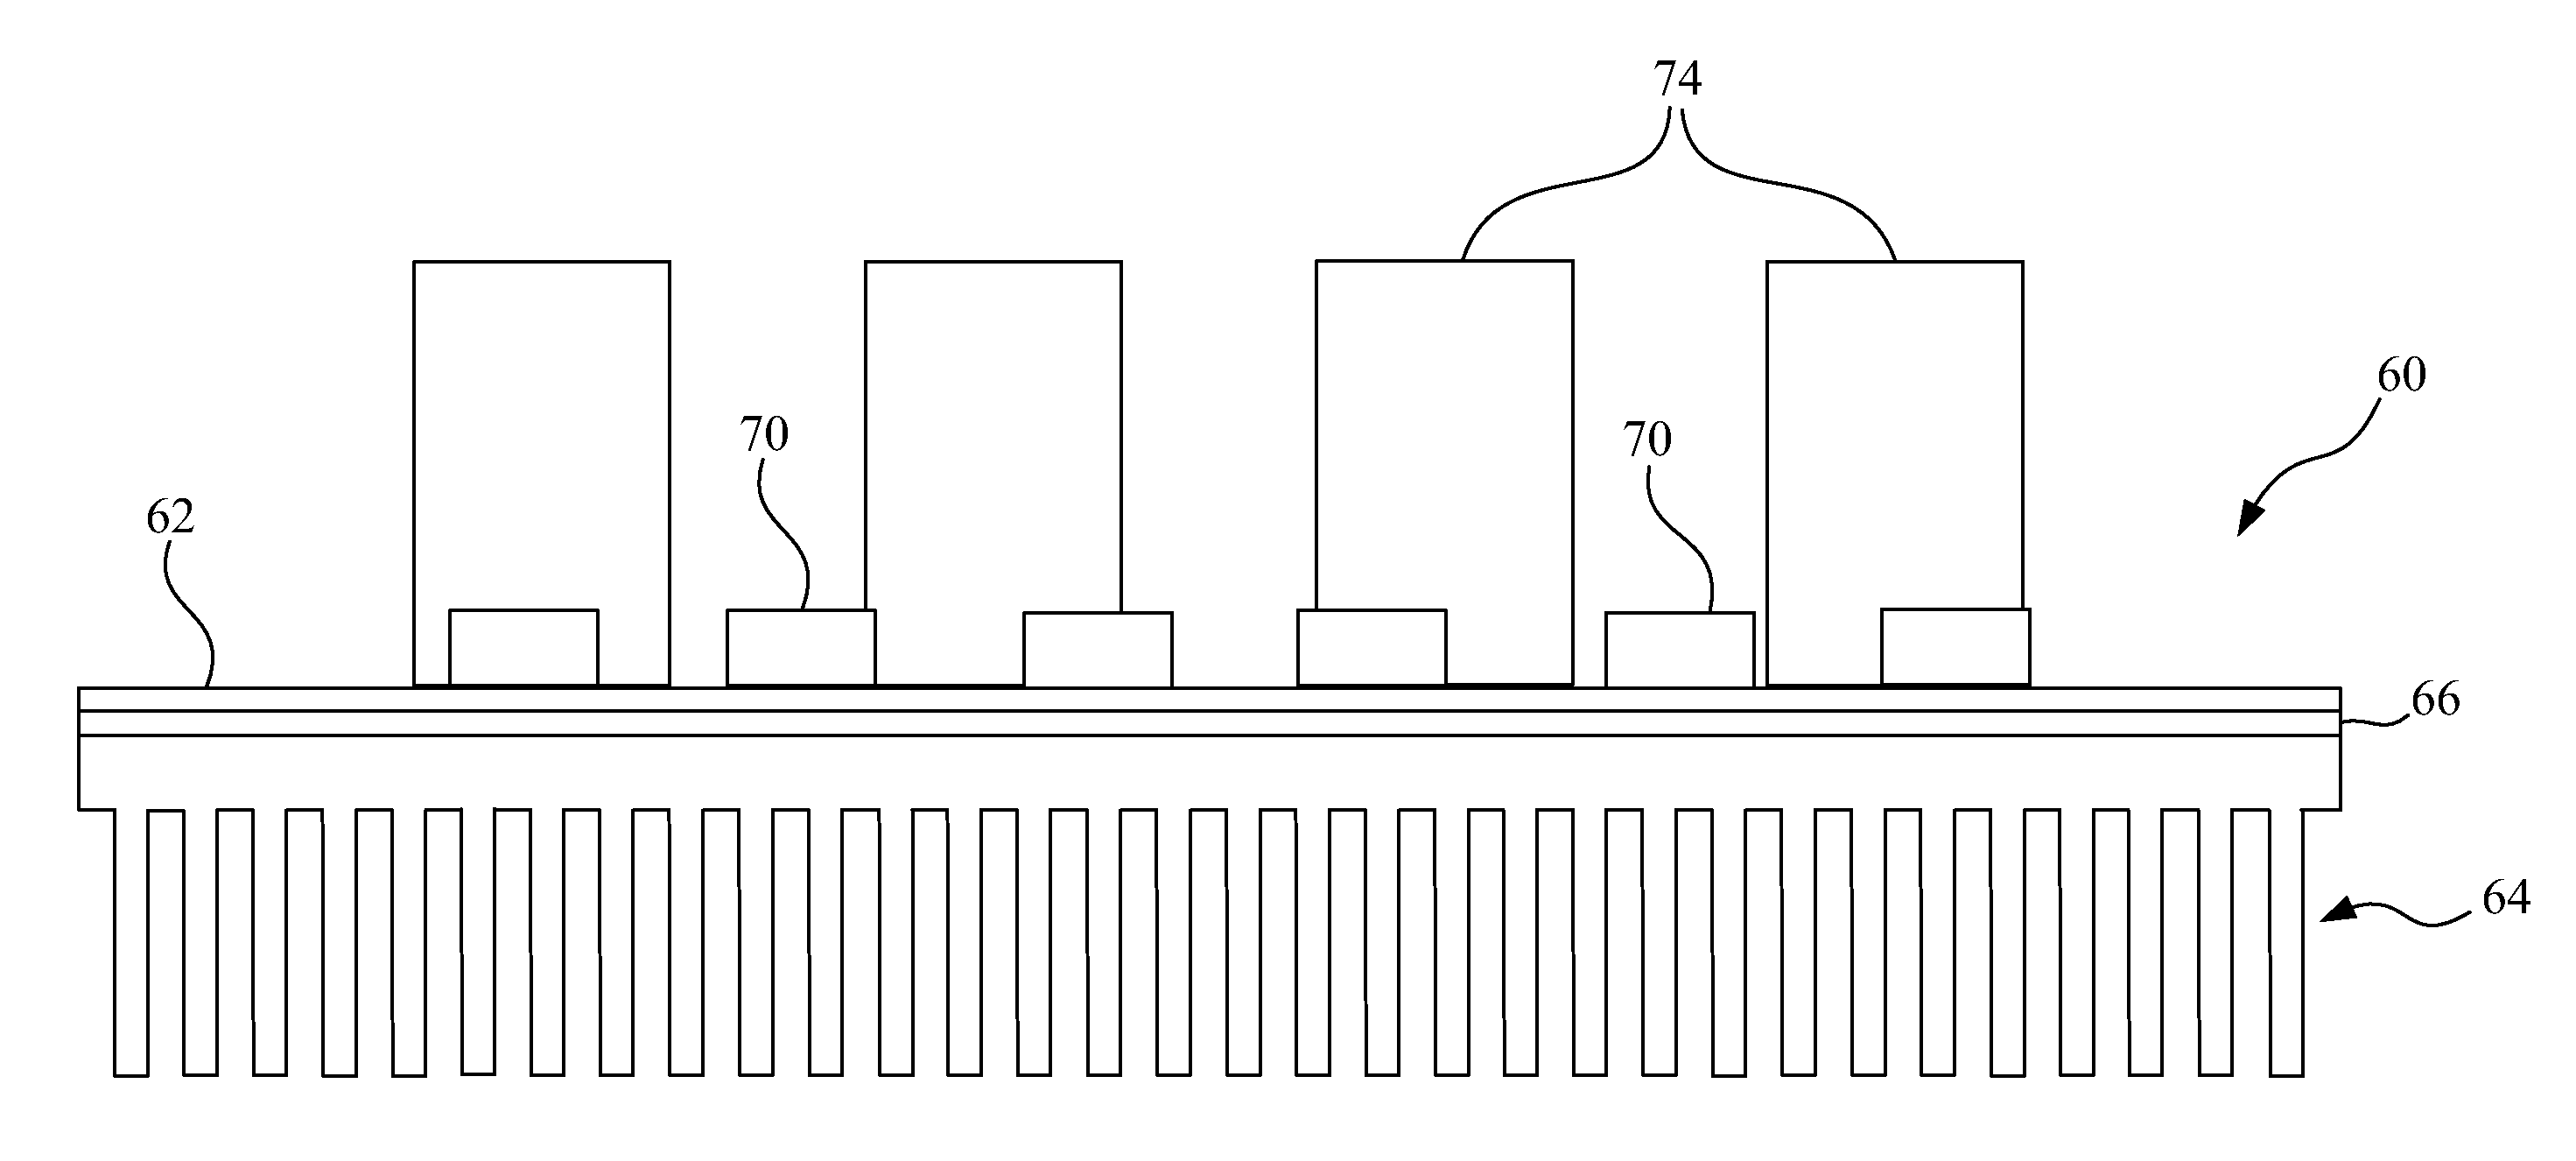 Electrical circuit assembly for high-power electronics